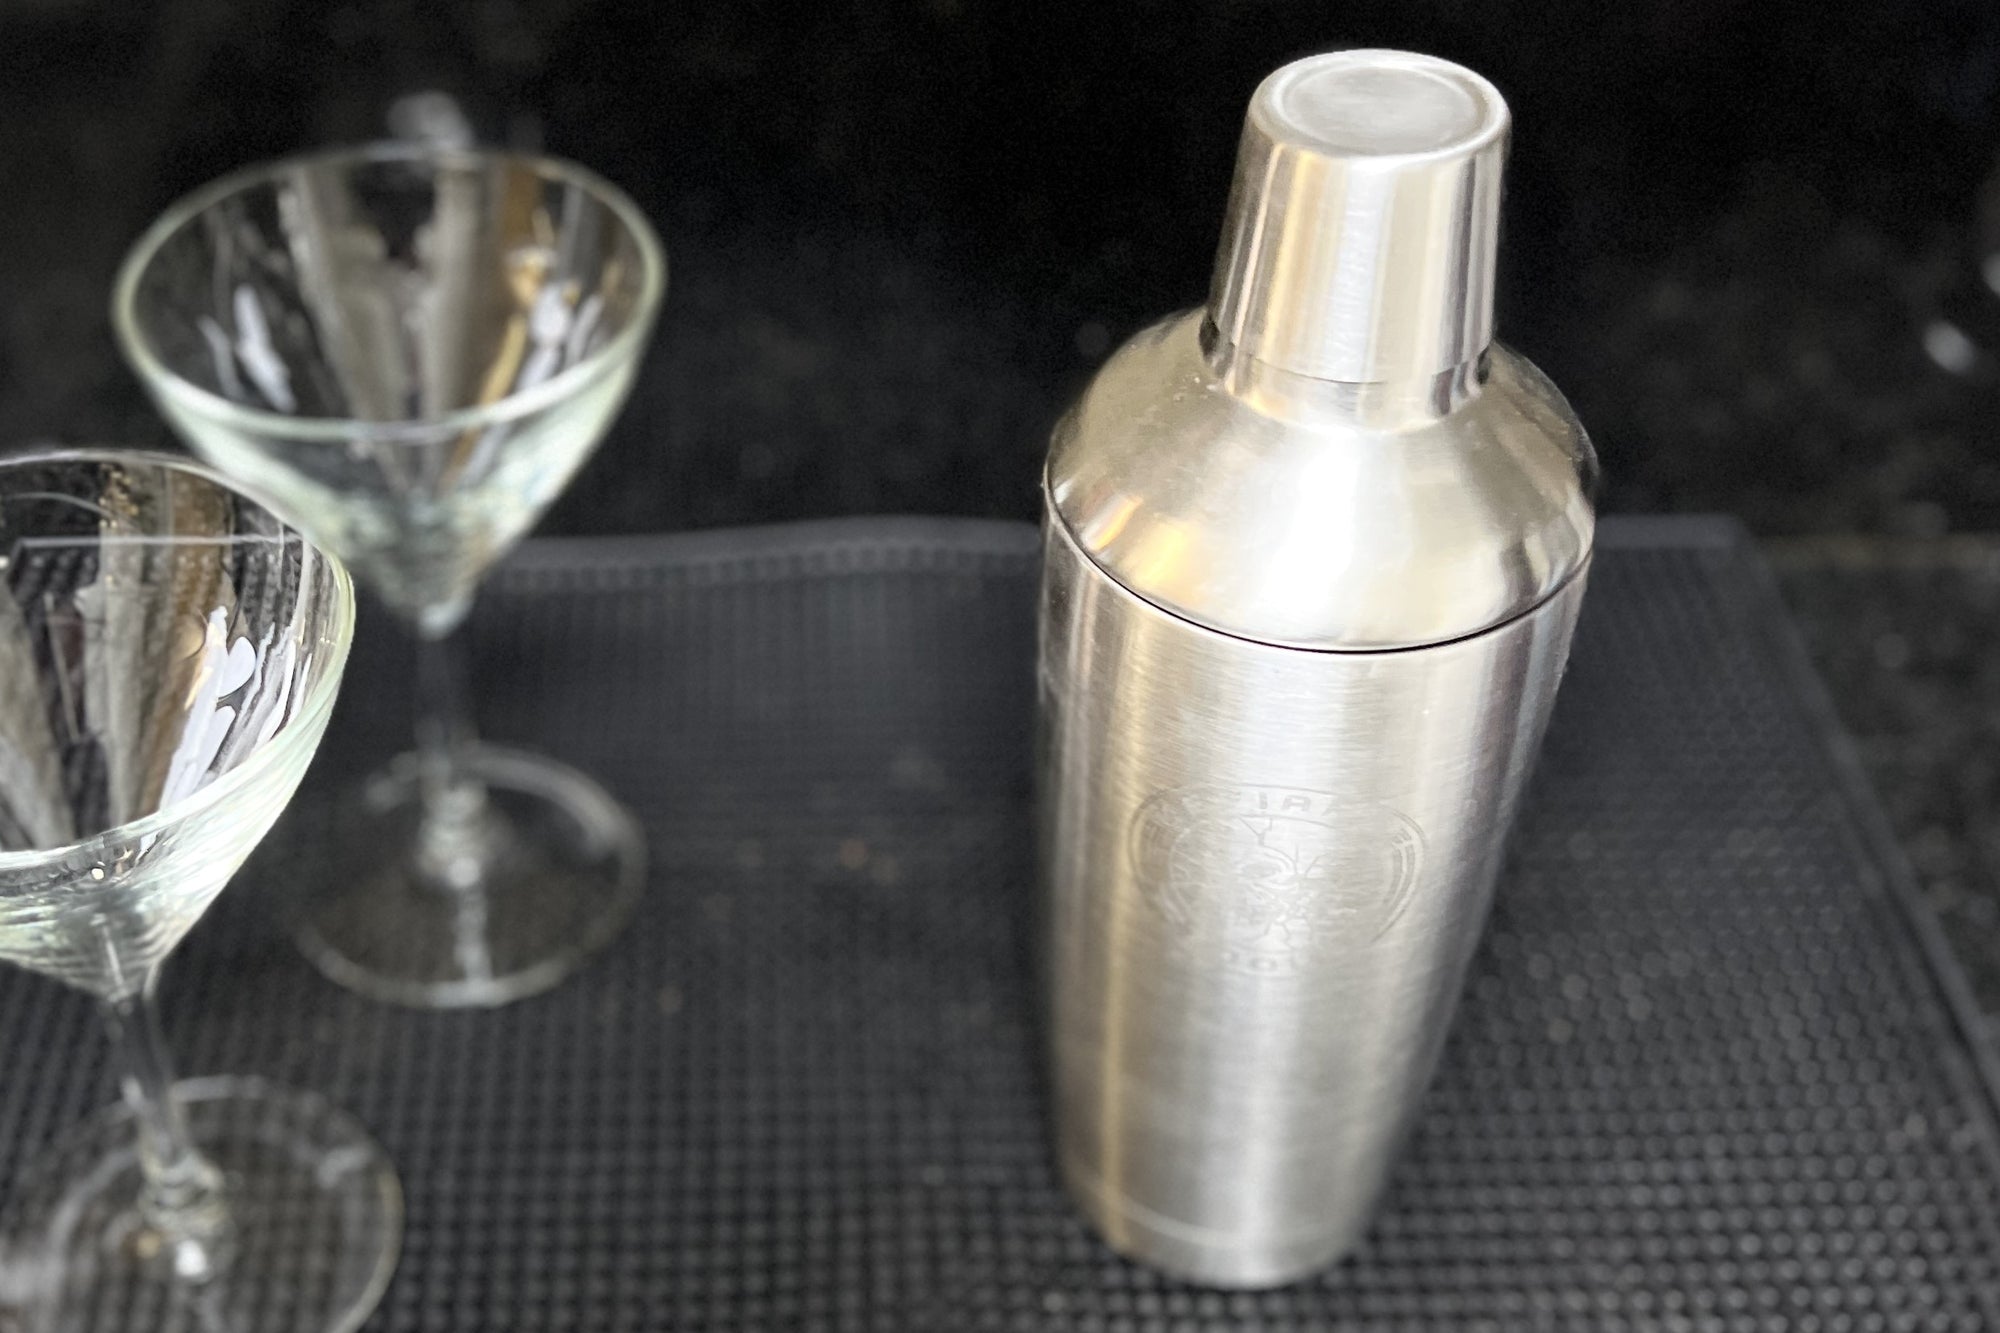 16 oz Insulated Cocktail Shaker